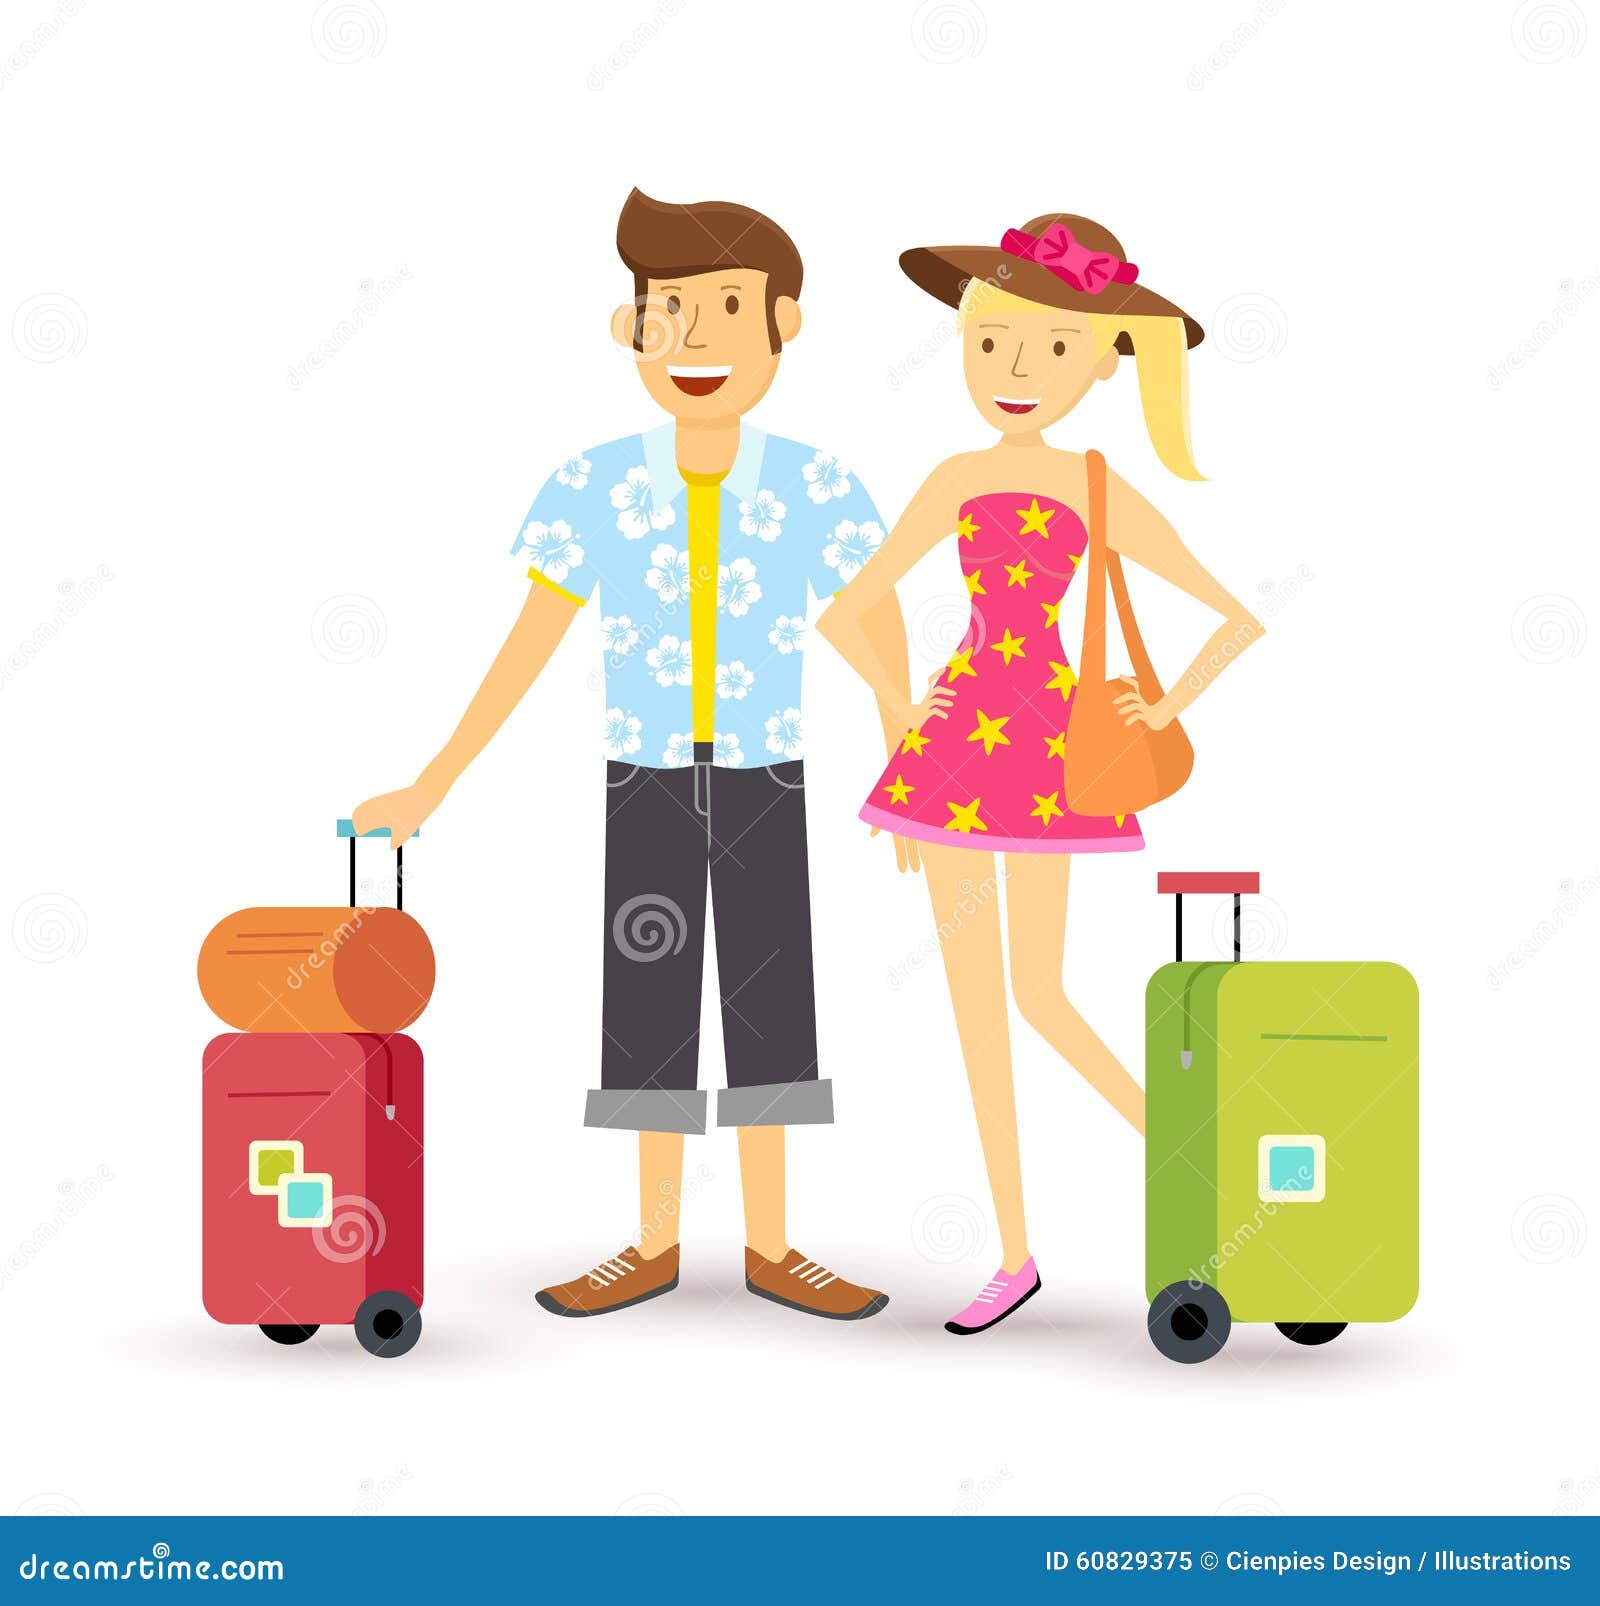 travel abroad clipart - photo #50